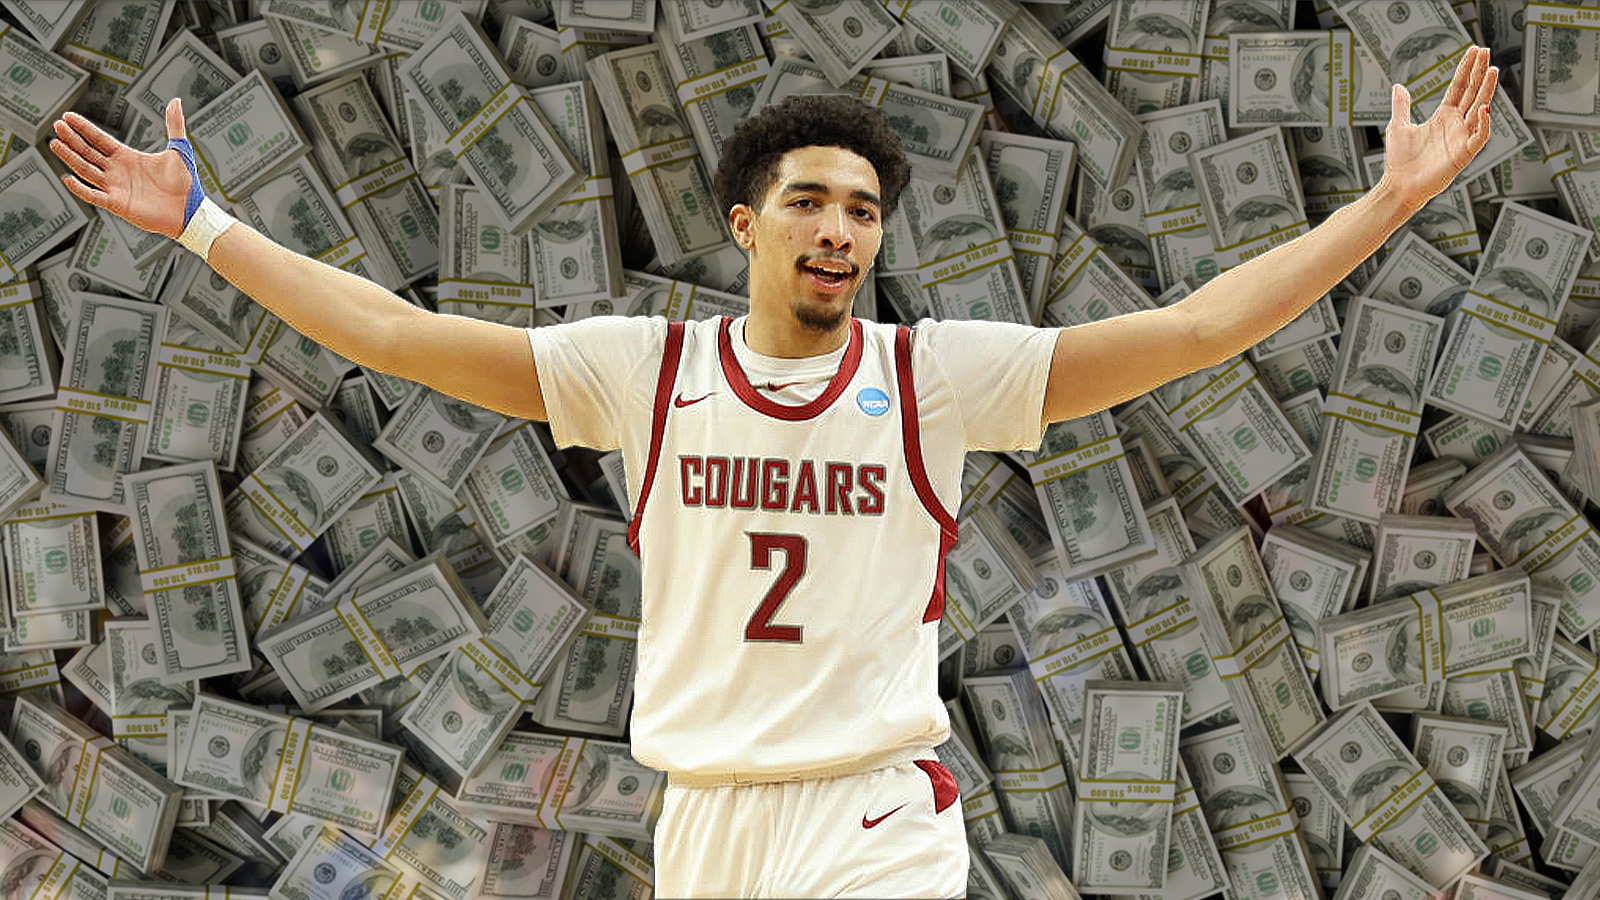 Pac12's March Madness Dominance Is Making Two Schools Rich